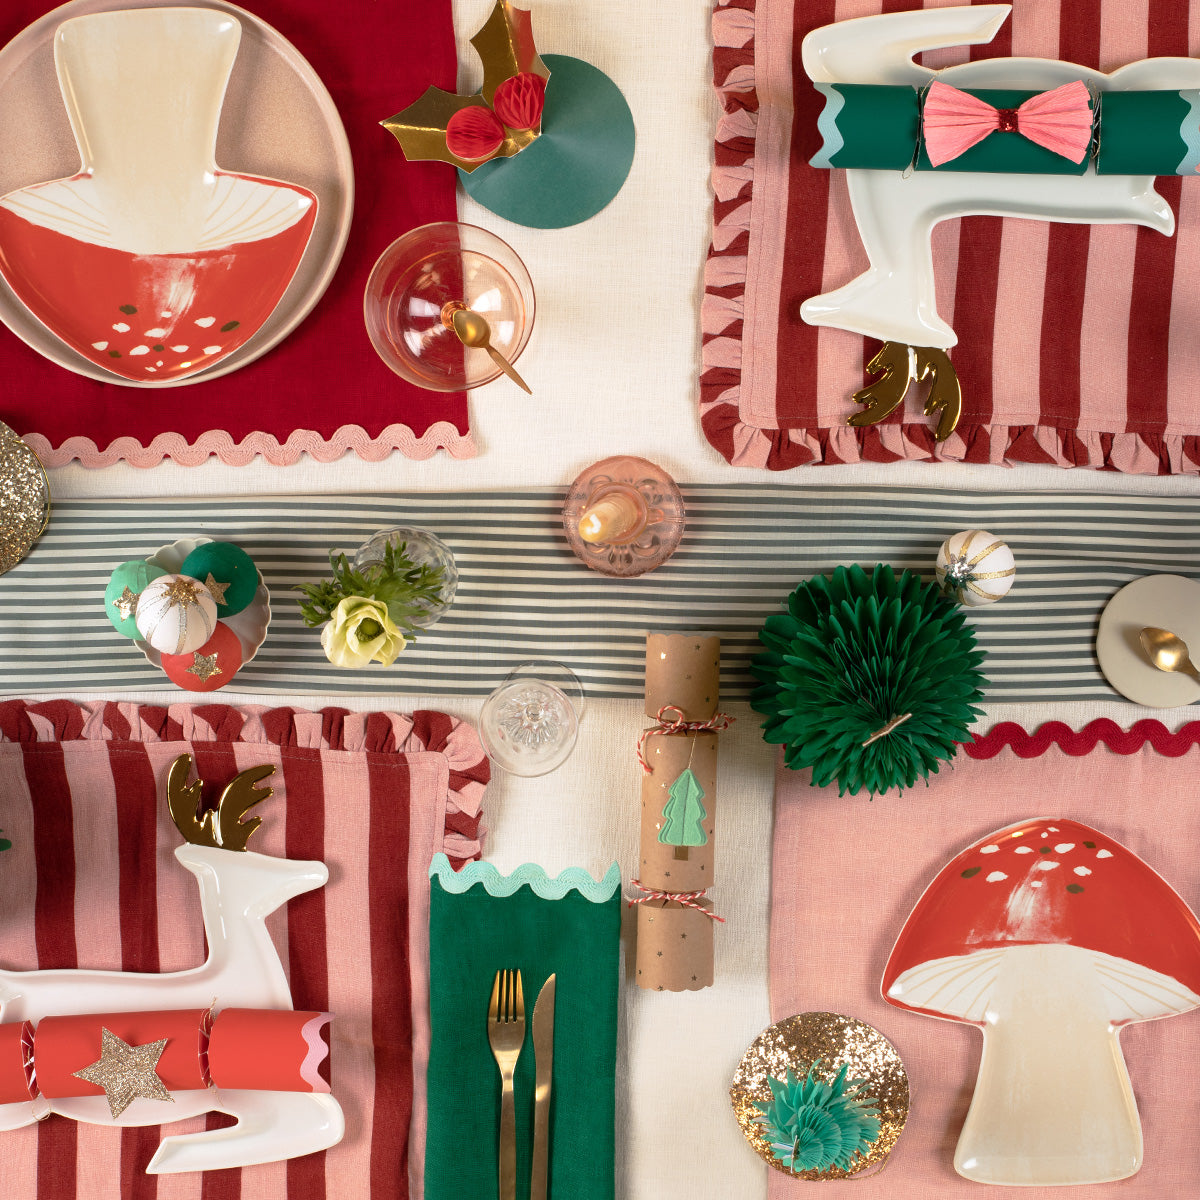 Our fabric napkins in festive red and pink are wonderful Christmas tableware.